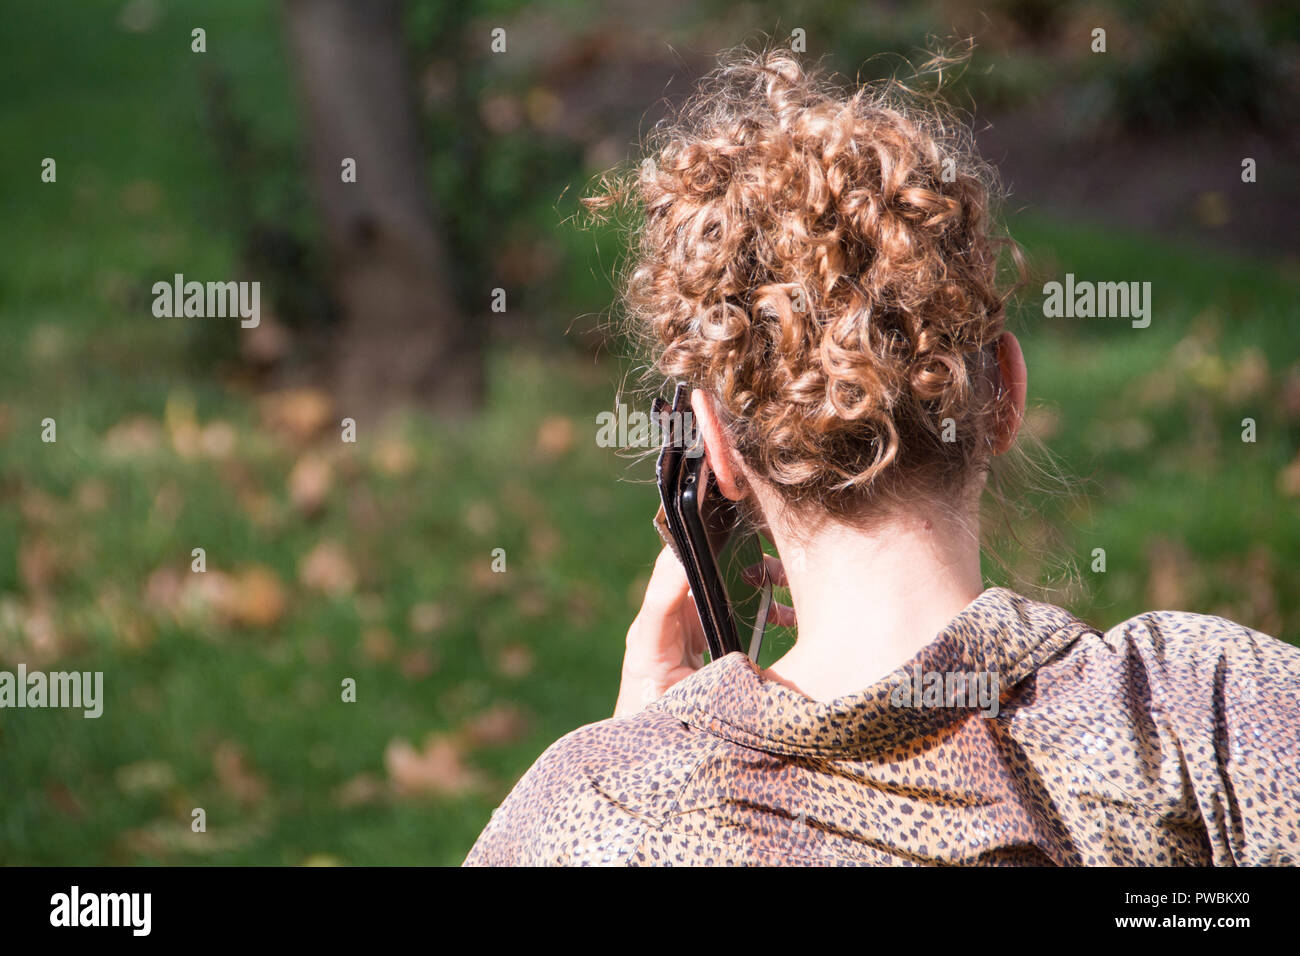 A red headed woman sitting alone on a park bench making a phone call on her mobile phone in London, UK Stock Photo